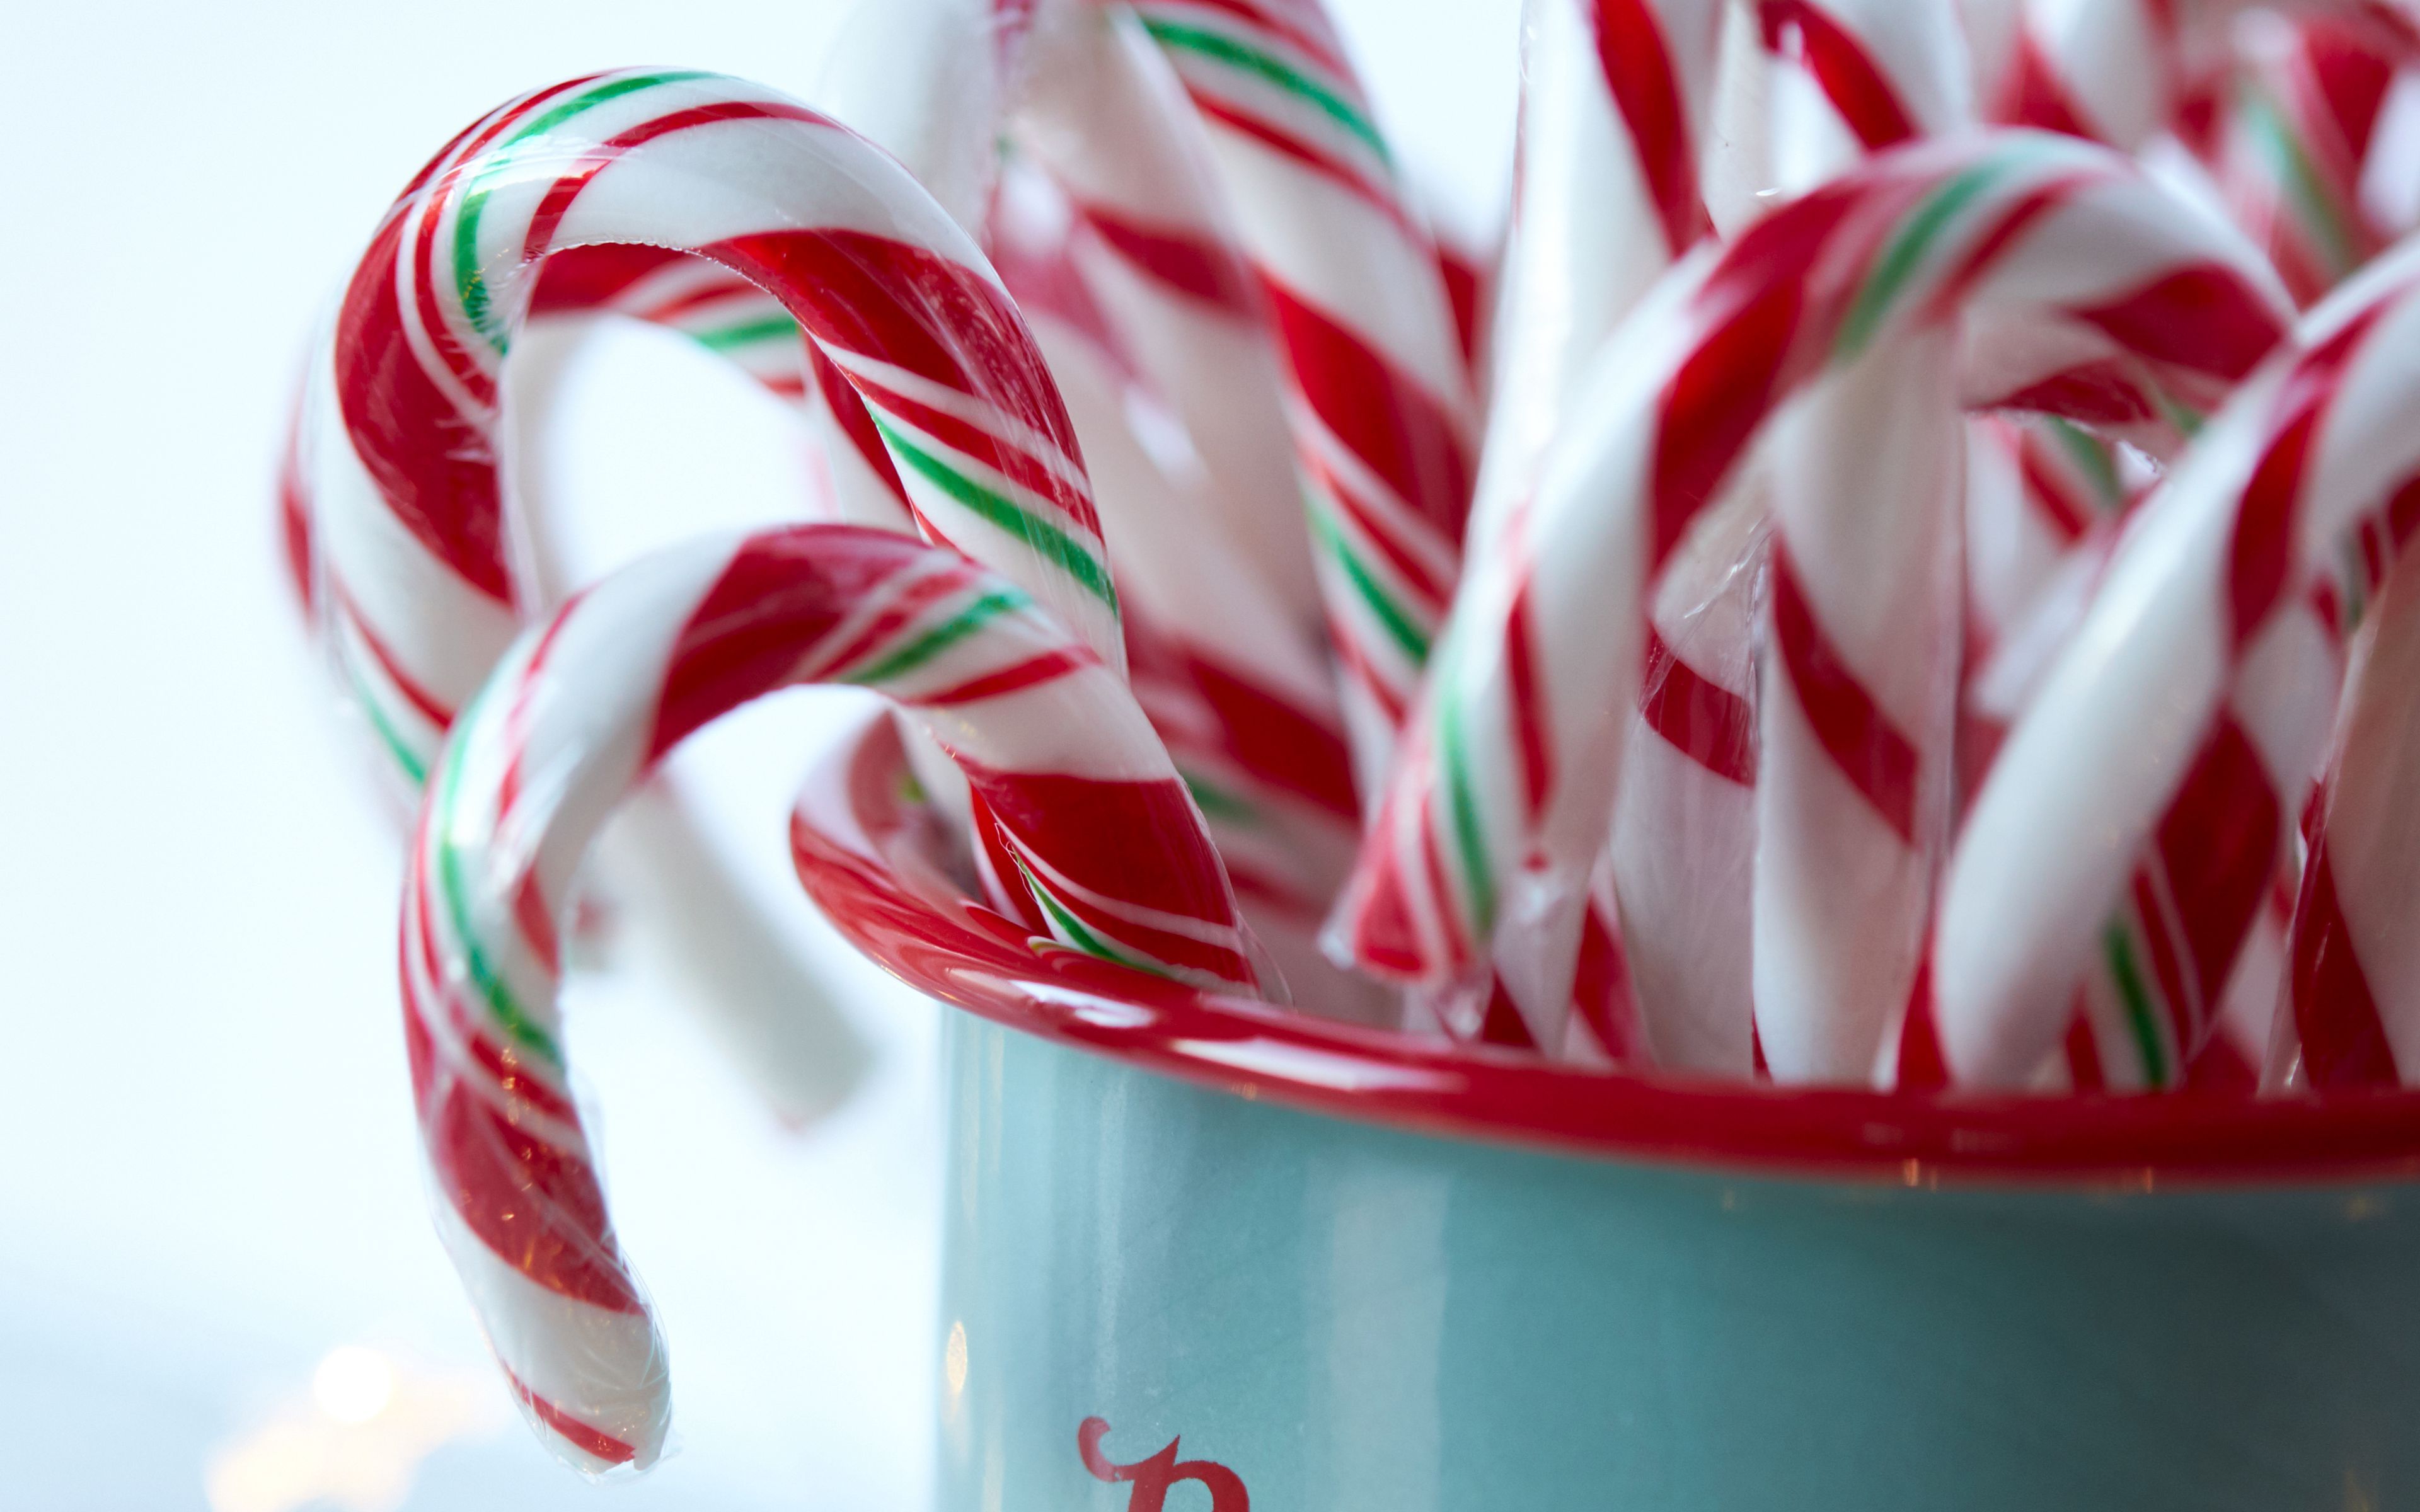 A cup of candy canes on top - Candy cane